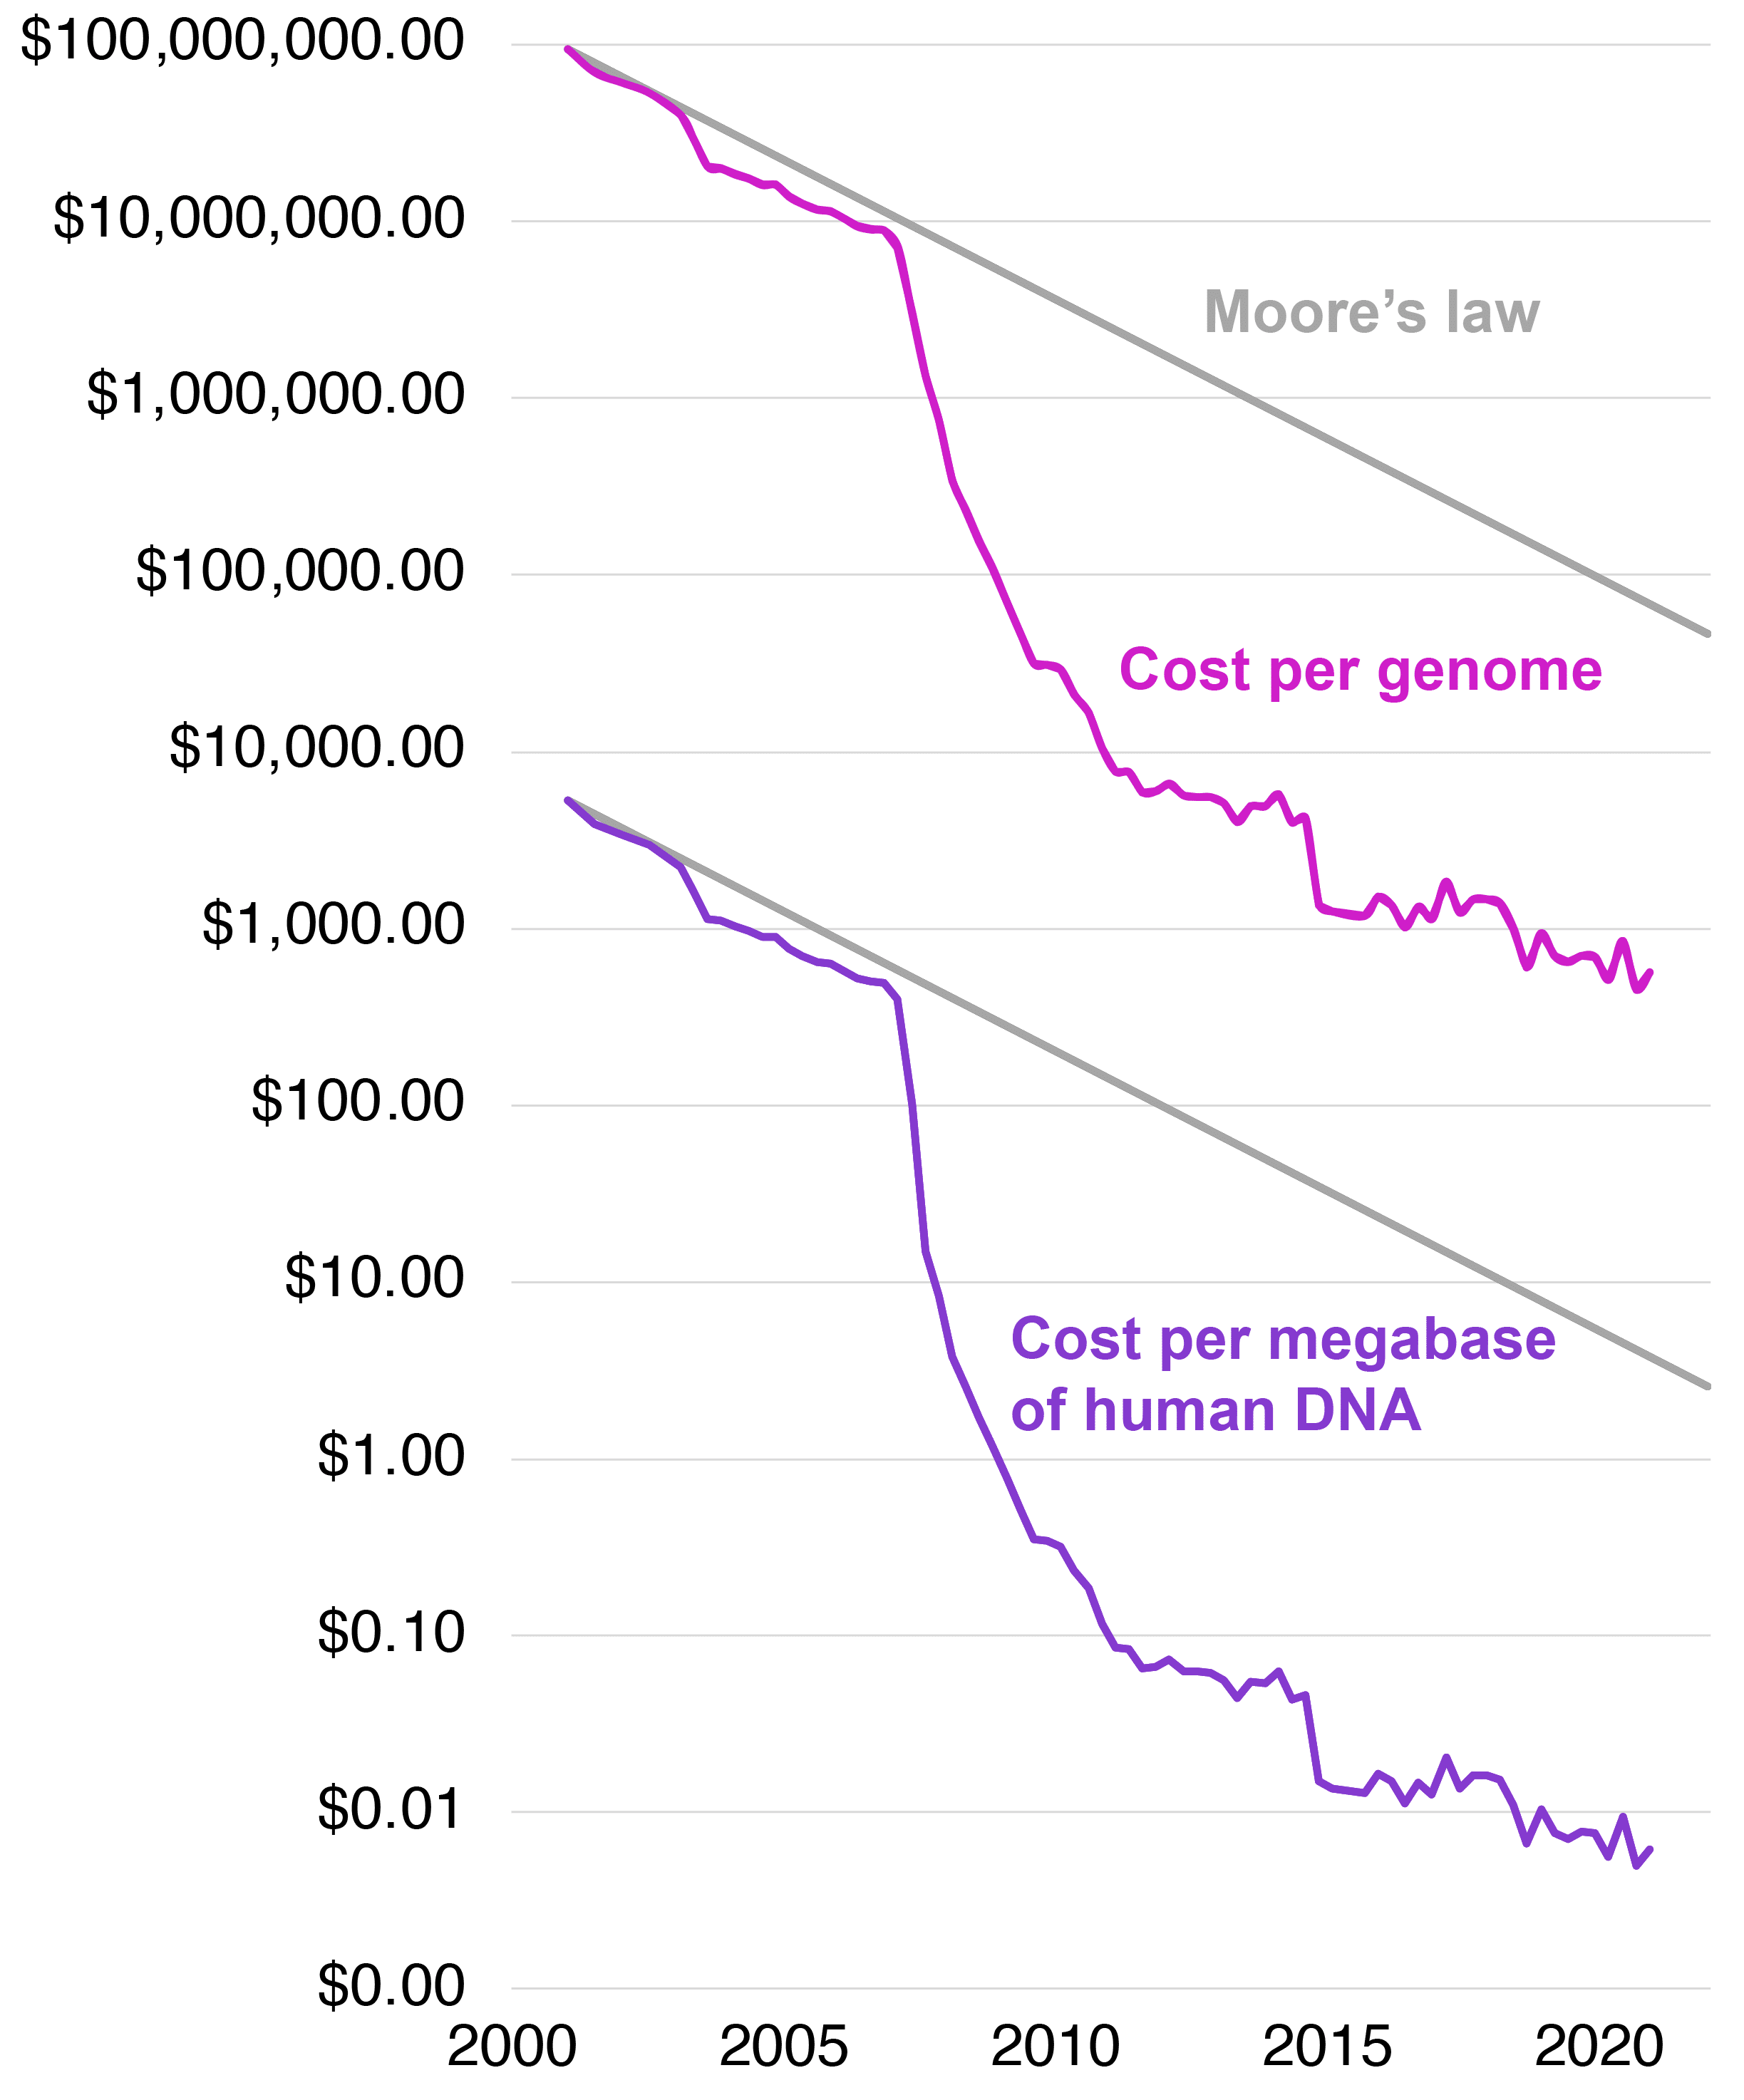 Costs are calculated by the National Human Genome Research Institute. Moore's law refers to the observation that computing power doubles roughly every two years—first predicted by Gordon Moore in 1965. Technologies that follow or improve upon Moore’s law are considered to be performing well. (National Human Genome Research Institute)